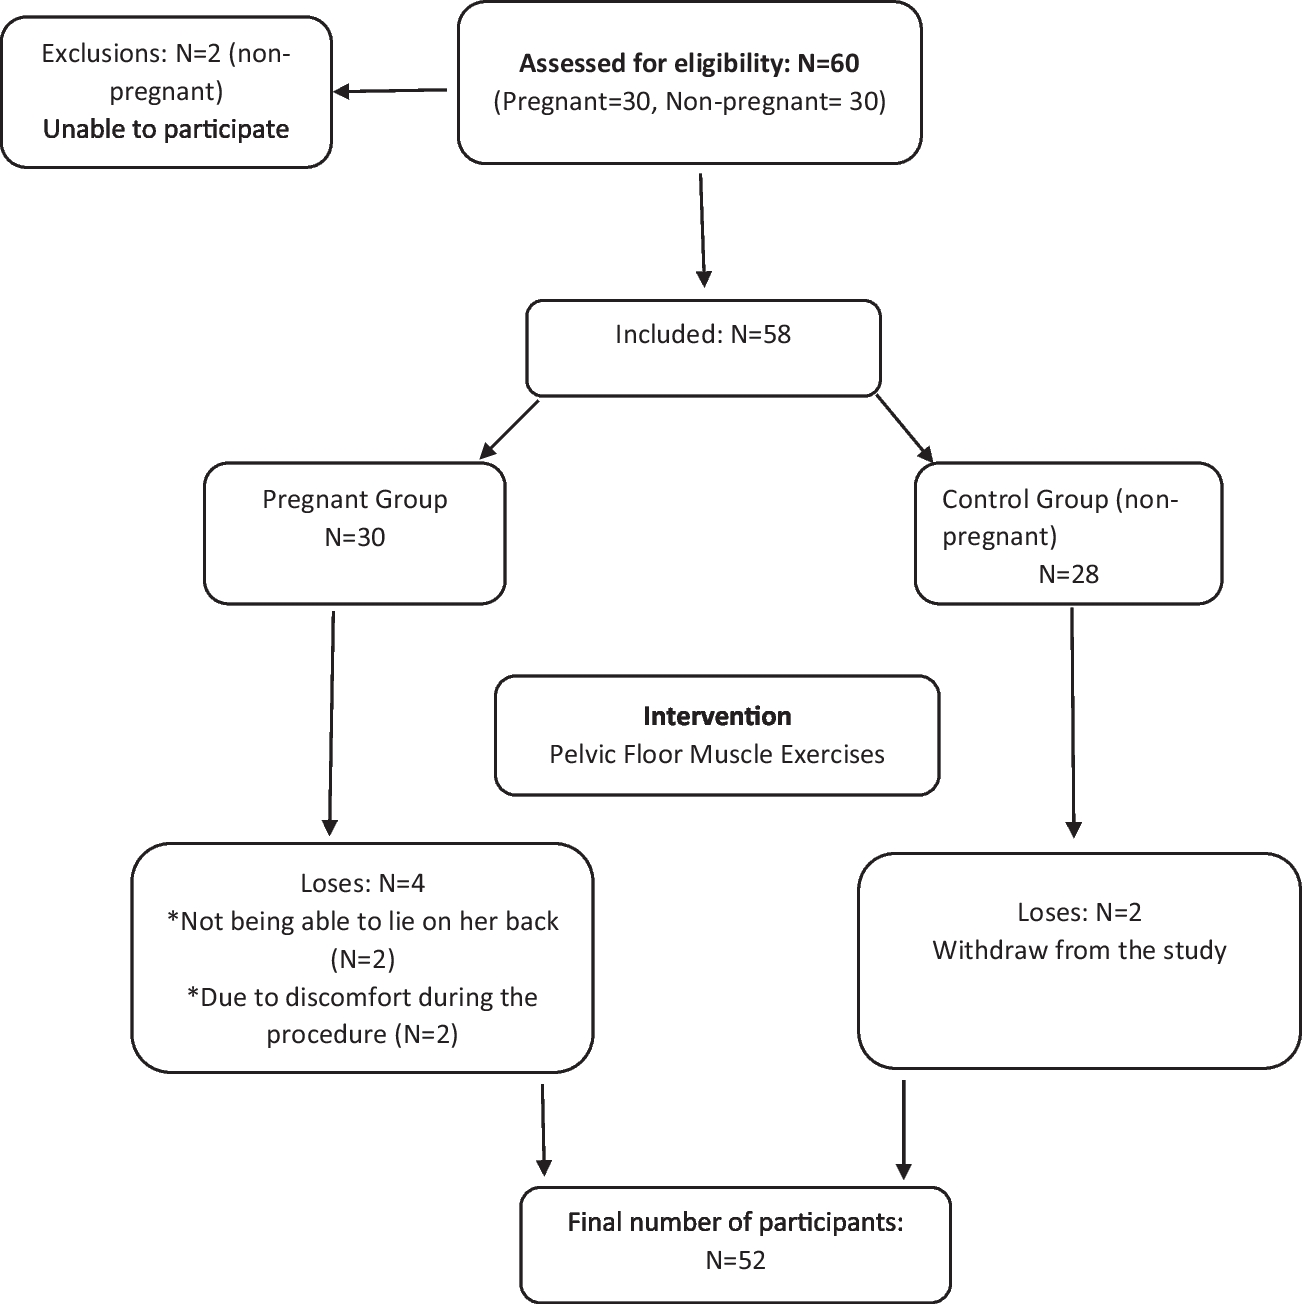 Does Pelvic Floor Muscle Exercise Change the Hemodynamic Responses of the Inferior Vena Cava in Pregnant Women? A Prospective-Controlled Study